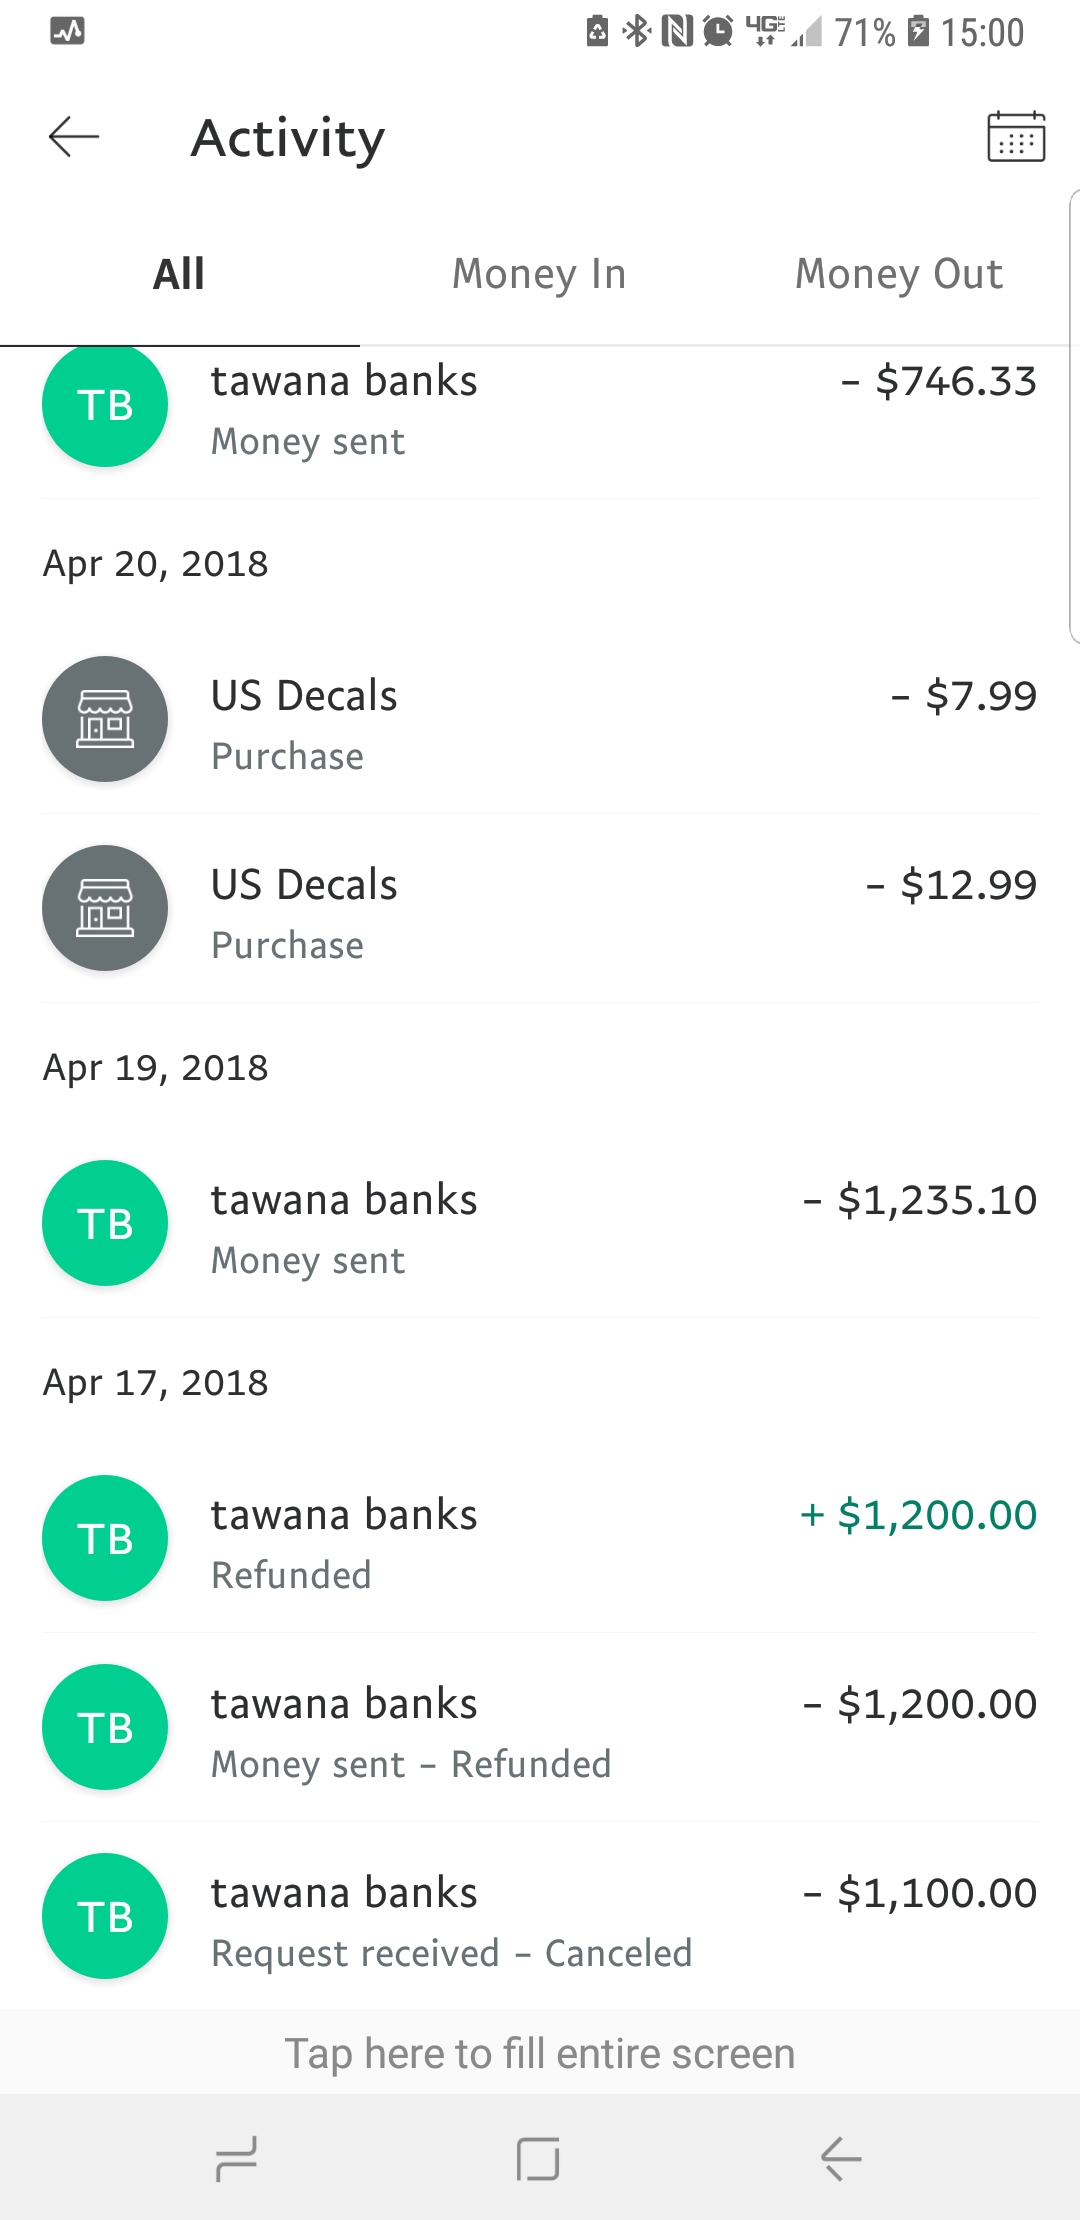 Tawana Banks requested money to be PayPal